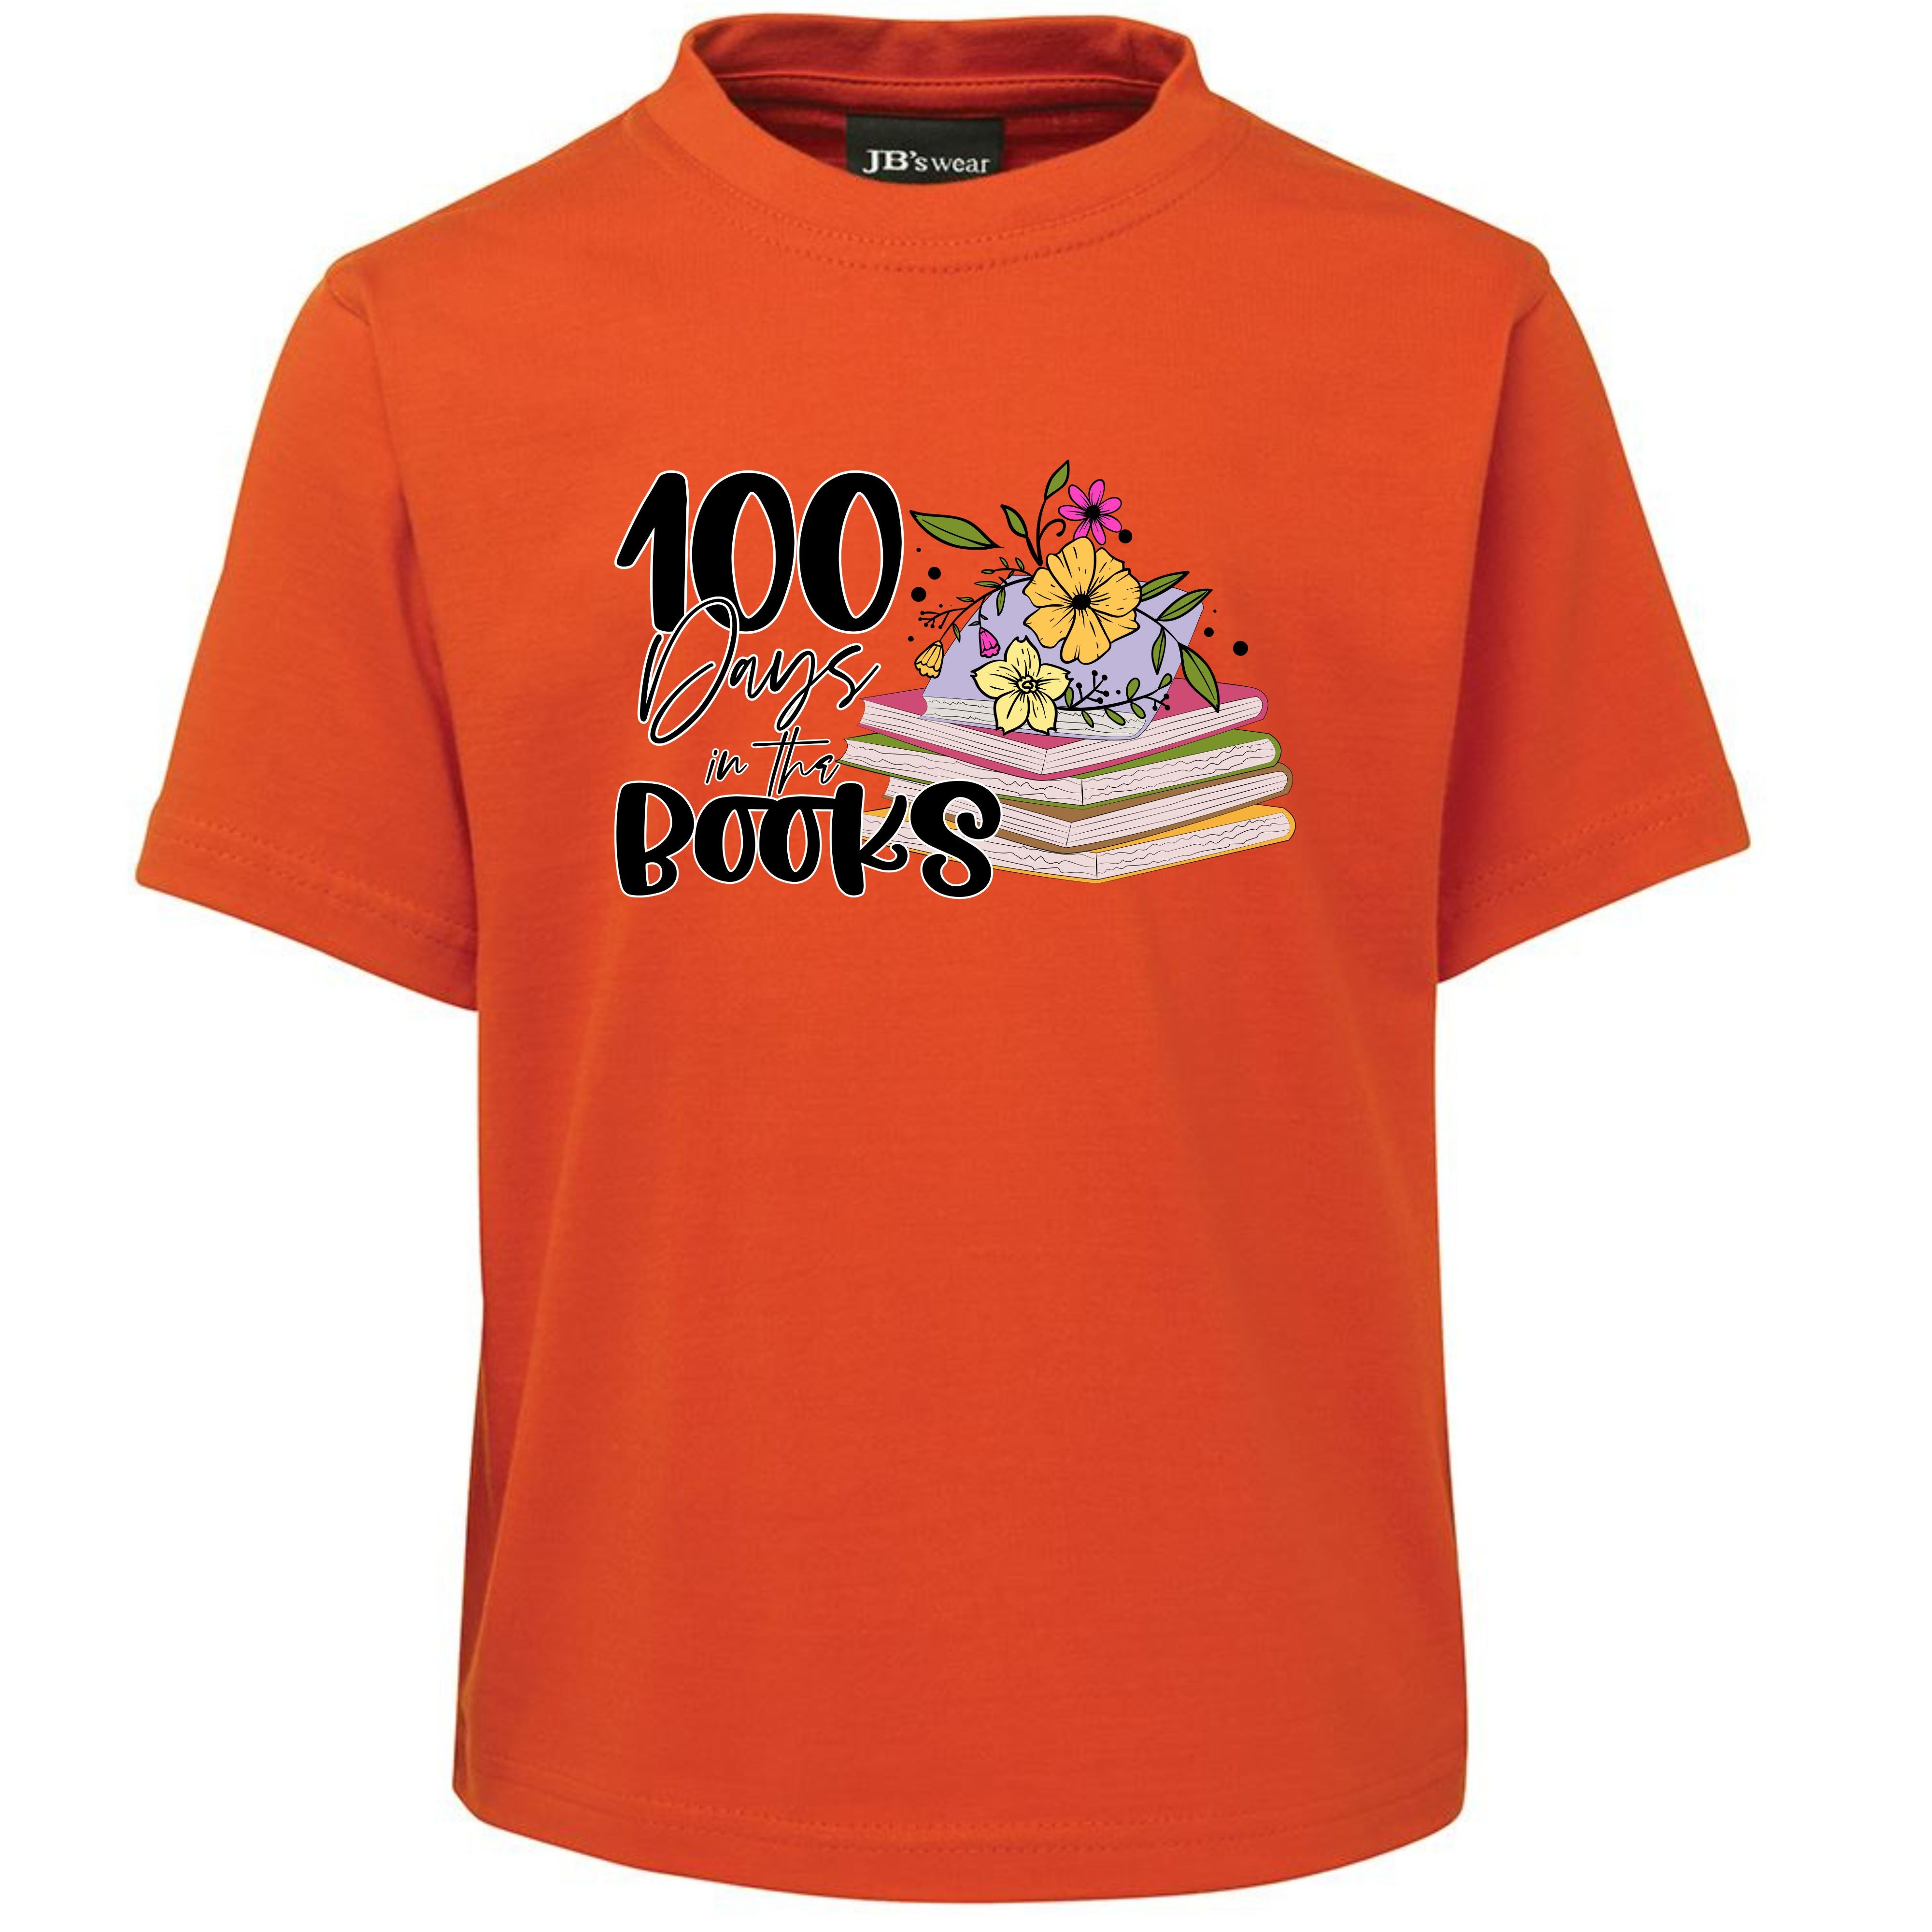 100 DAYS IN THE BOOKS TSHIRT